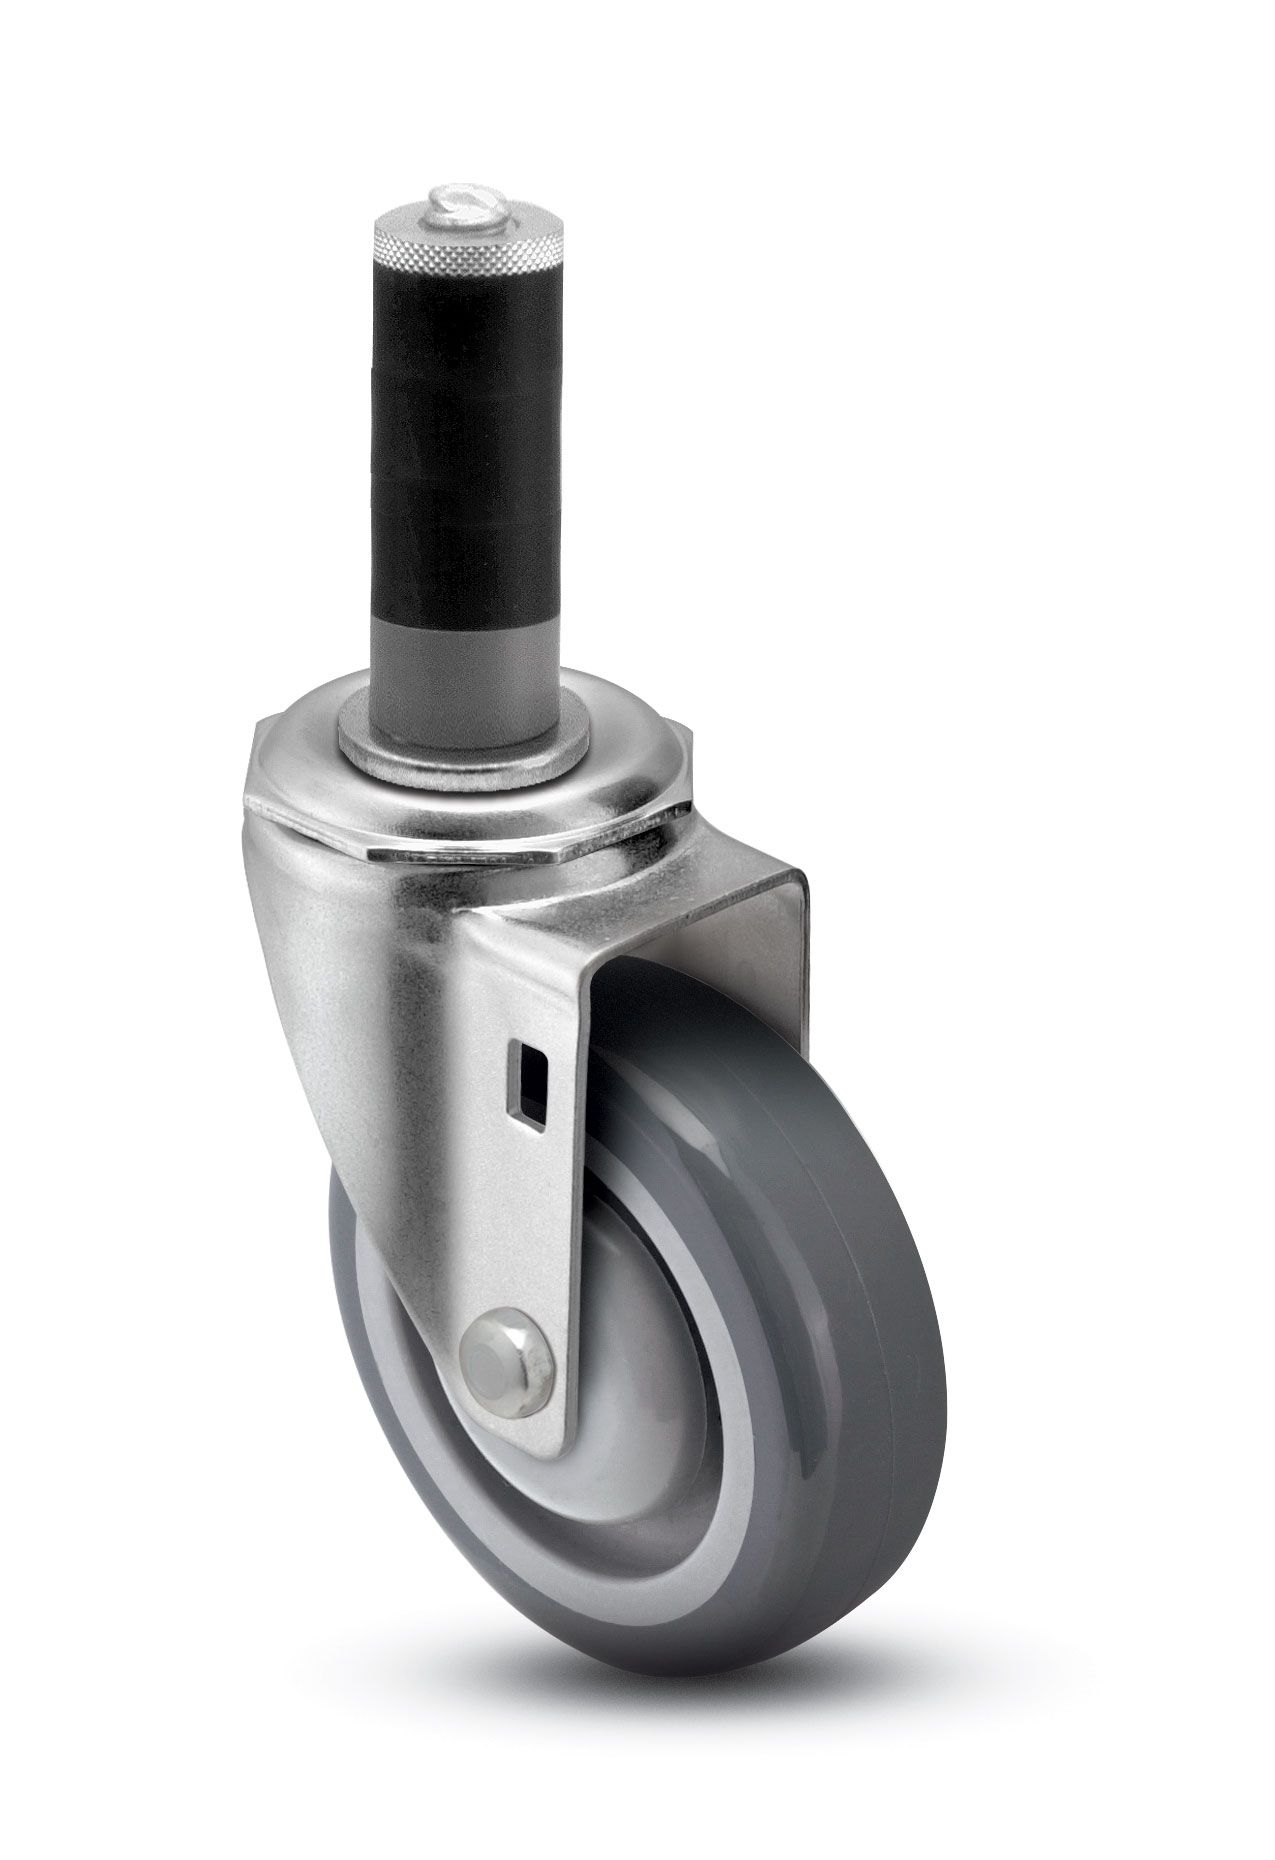 Caster; Swivel; 5" x 1-1/4"; PolyU on PolyO (Gray); Expandable Adapter (1-1/2" - 1-9/16" ID tubing); Zinc; Precision Ball Brng; 300#; Total Lock; Dust Cover (Item #65049)